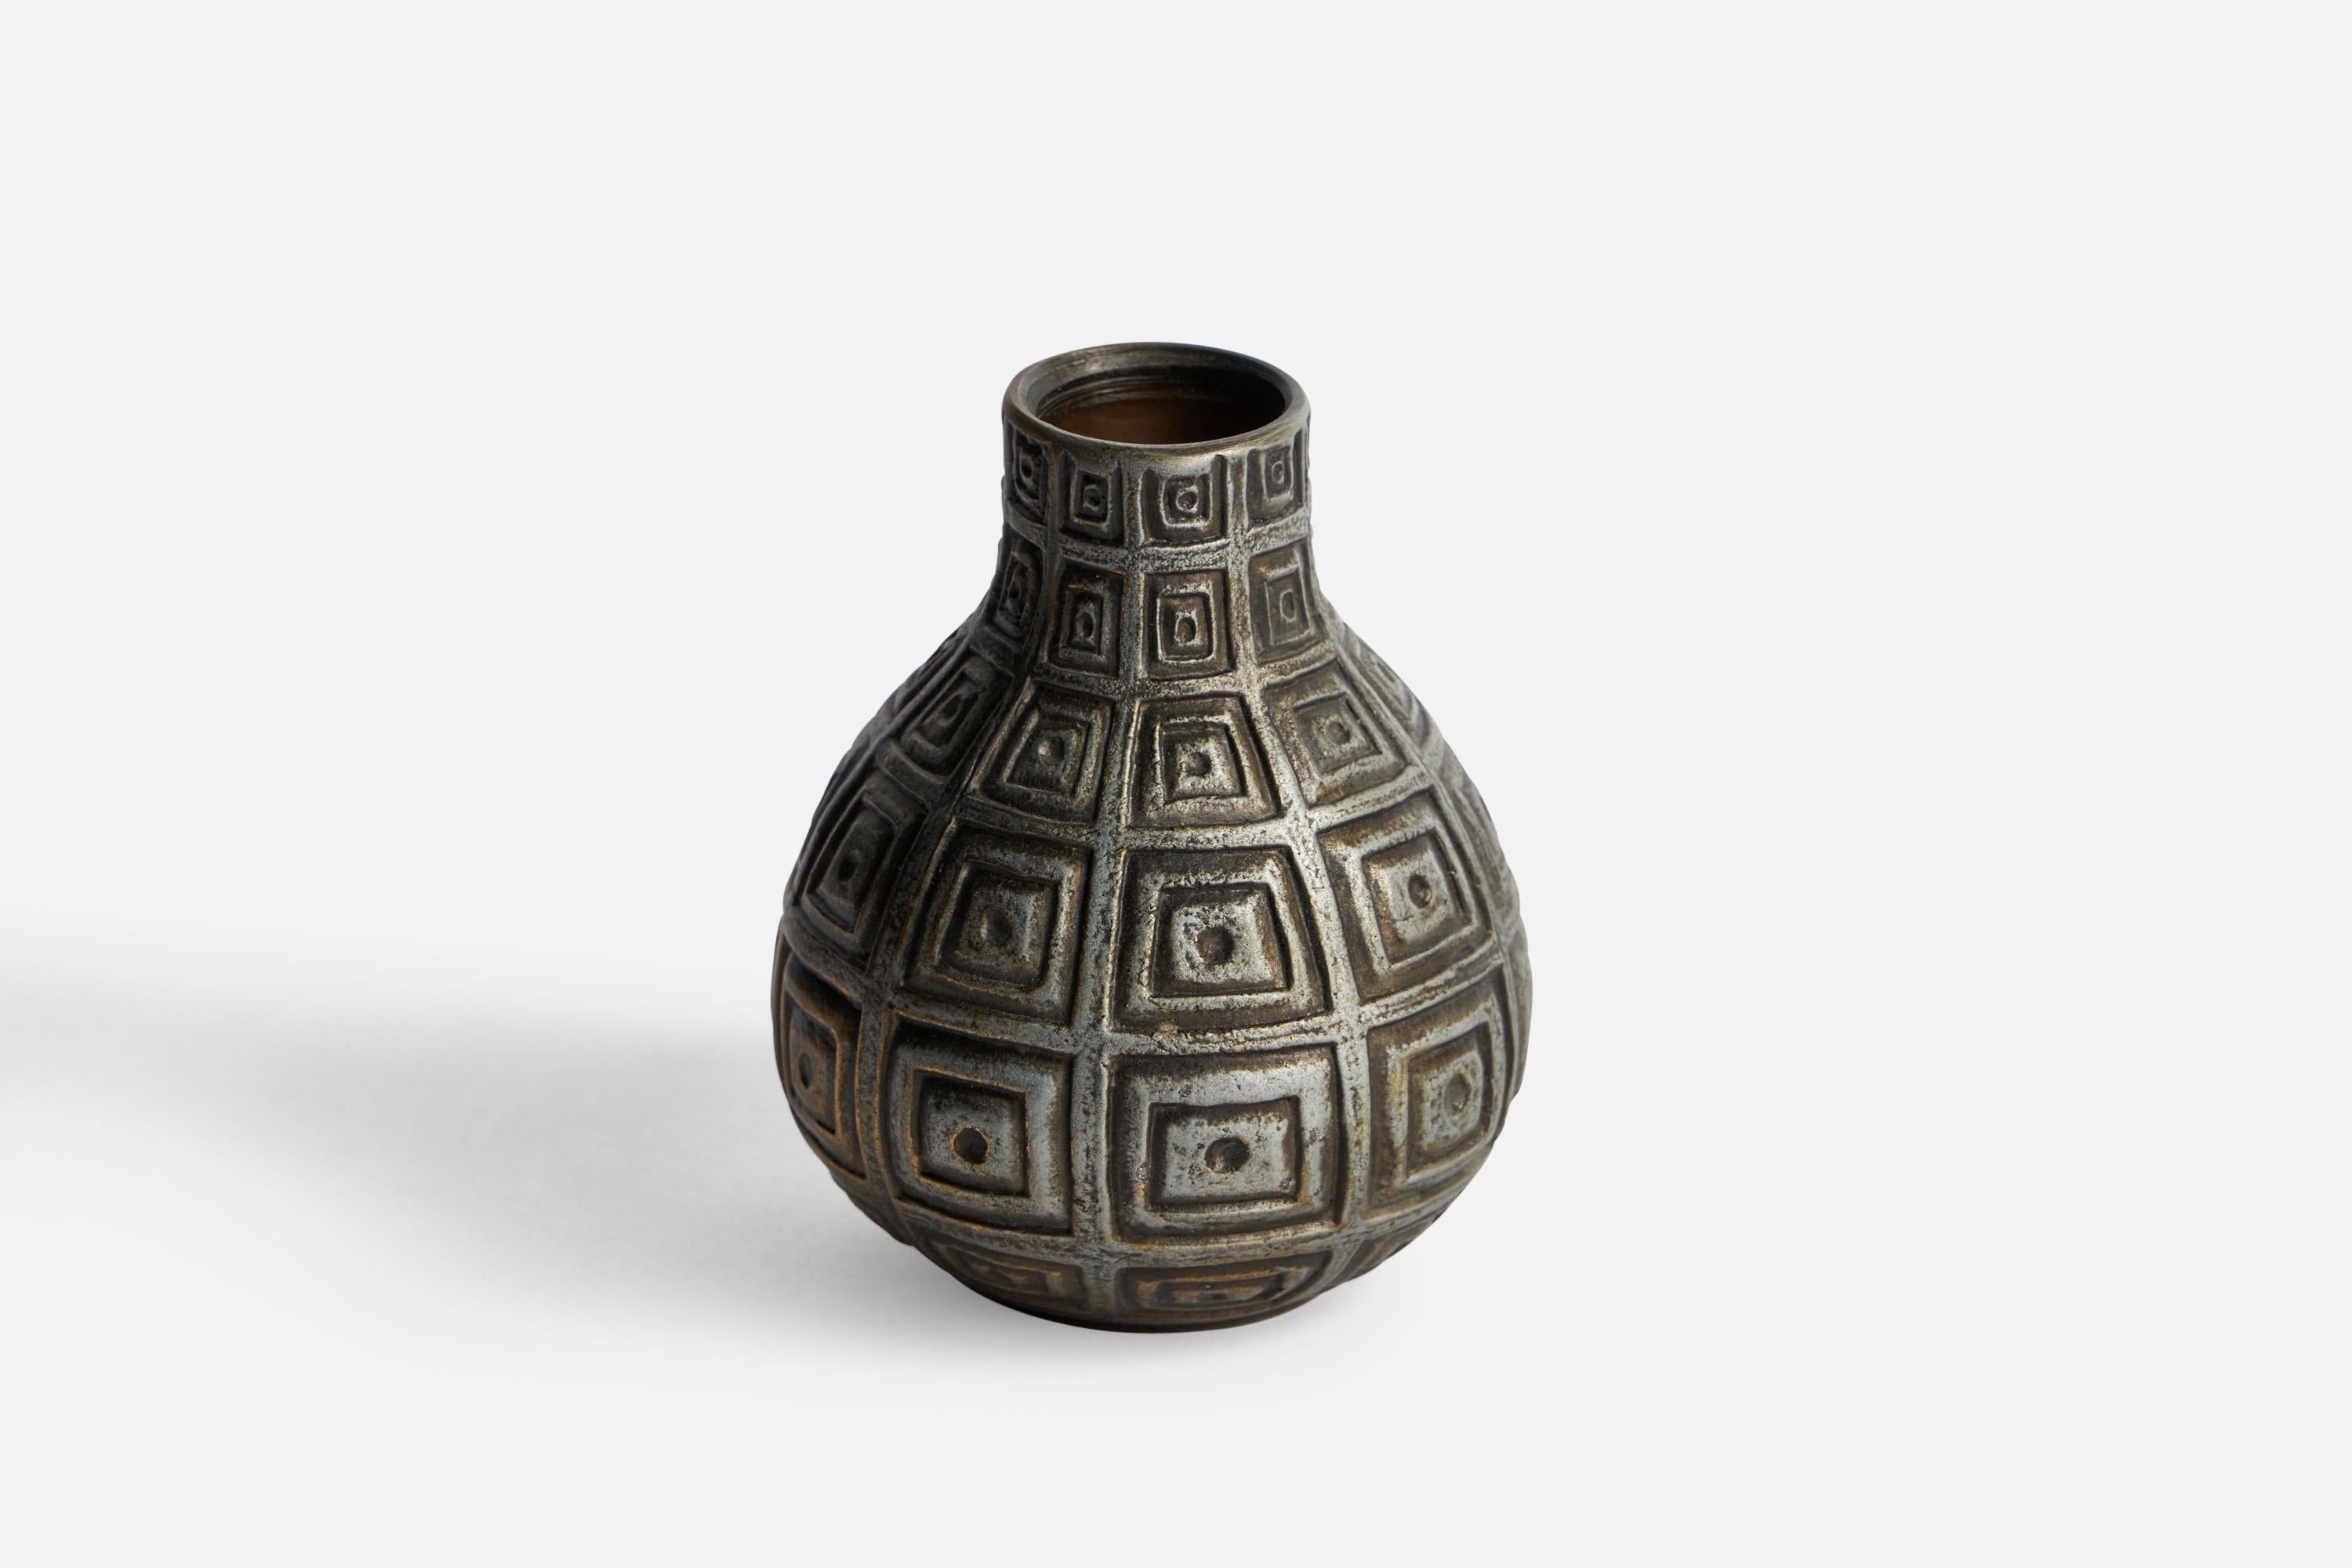 A small vase designed by Sonja Katzin and produced by Nils-Johan, Sweden, c. 1960s.